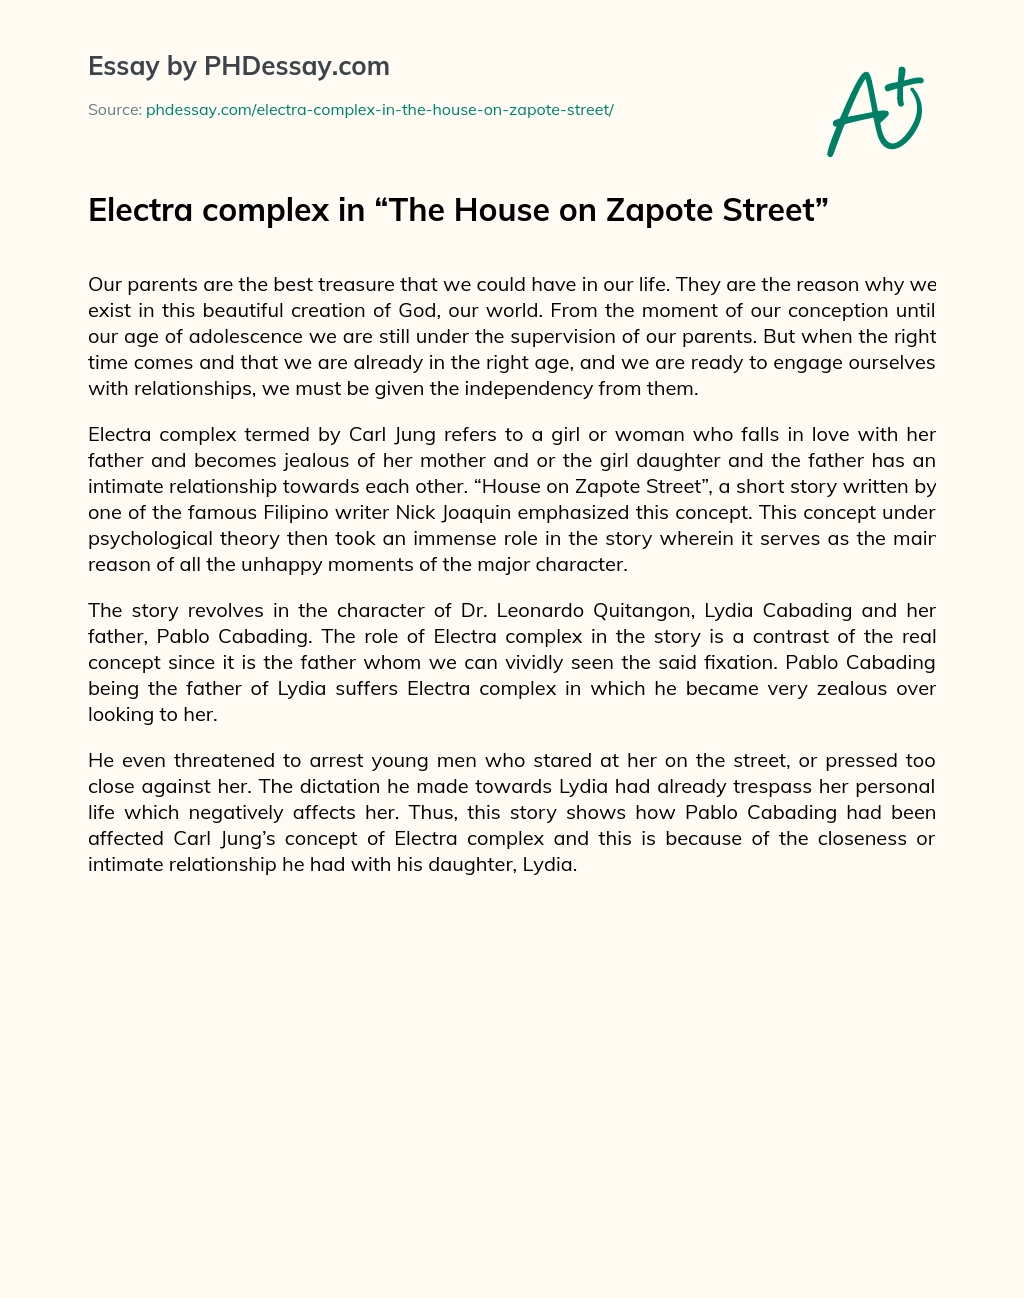 Electra complex in “The House on Zapote Street” essay